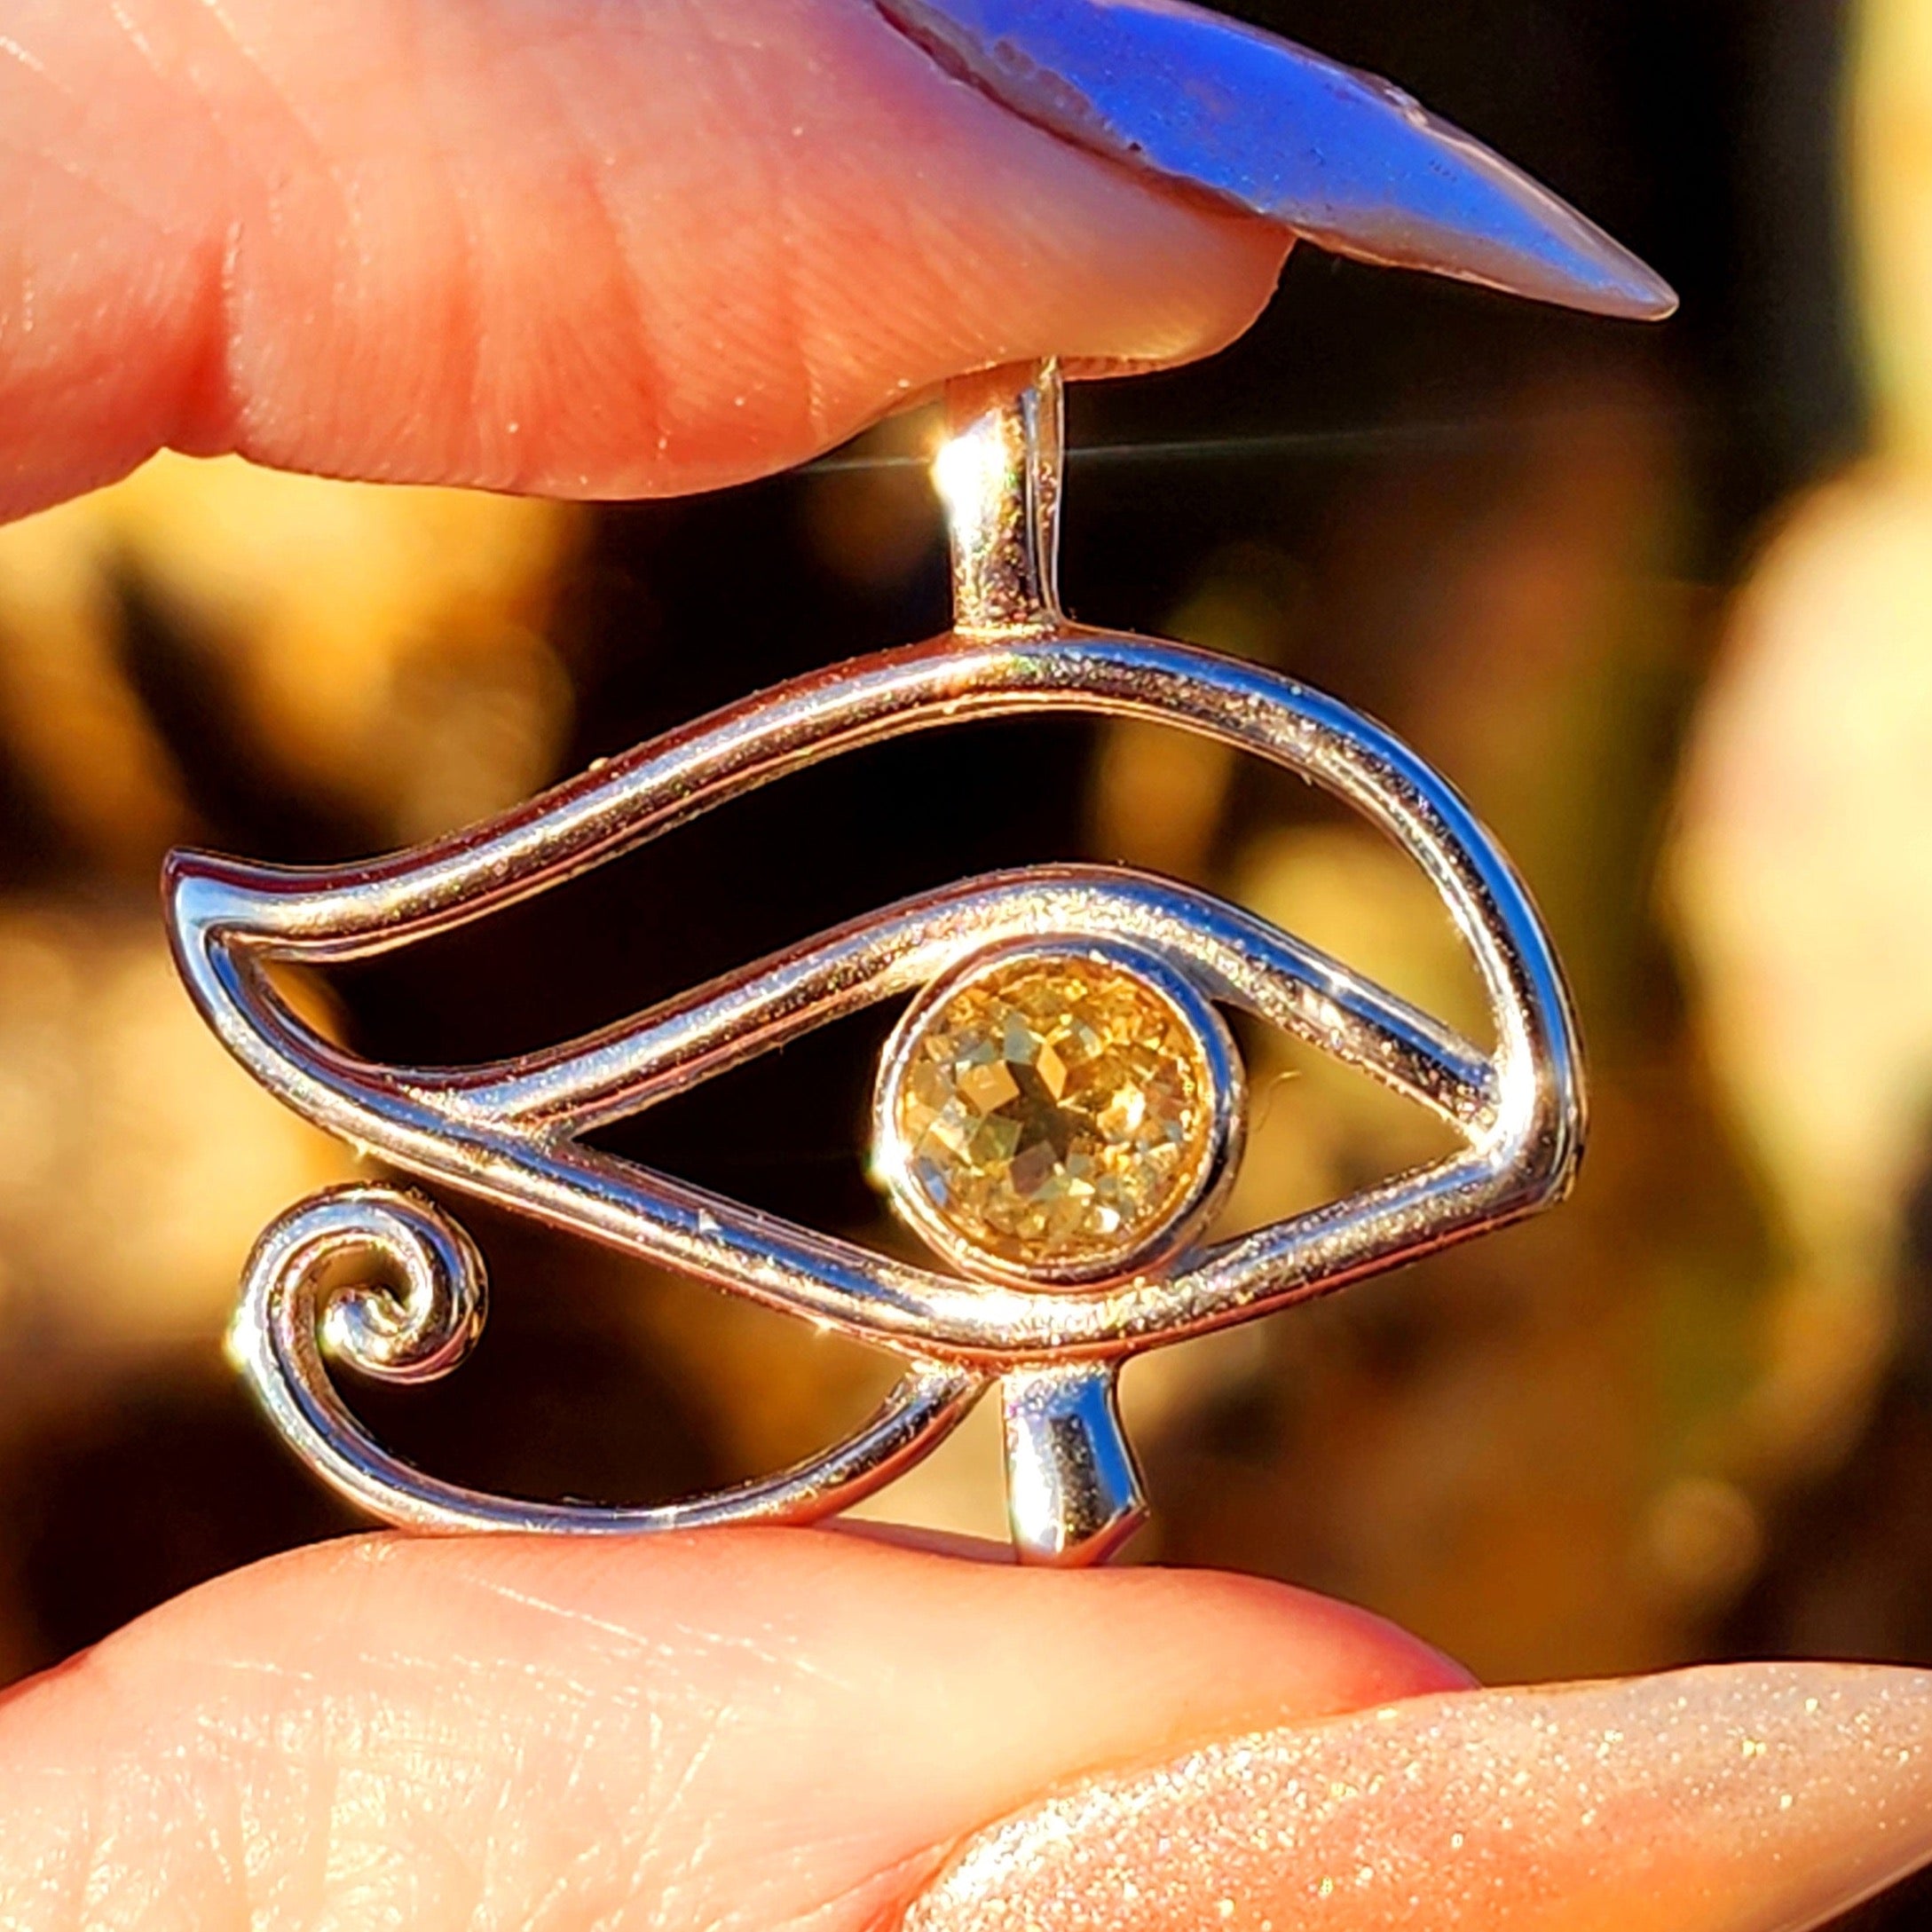 Citrine Eye of Ra Amulet Pendant .925 Silver for Abundance, Protection and Power